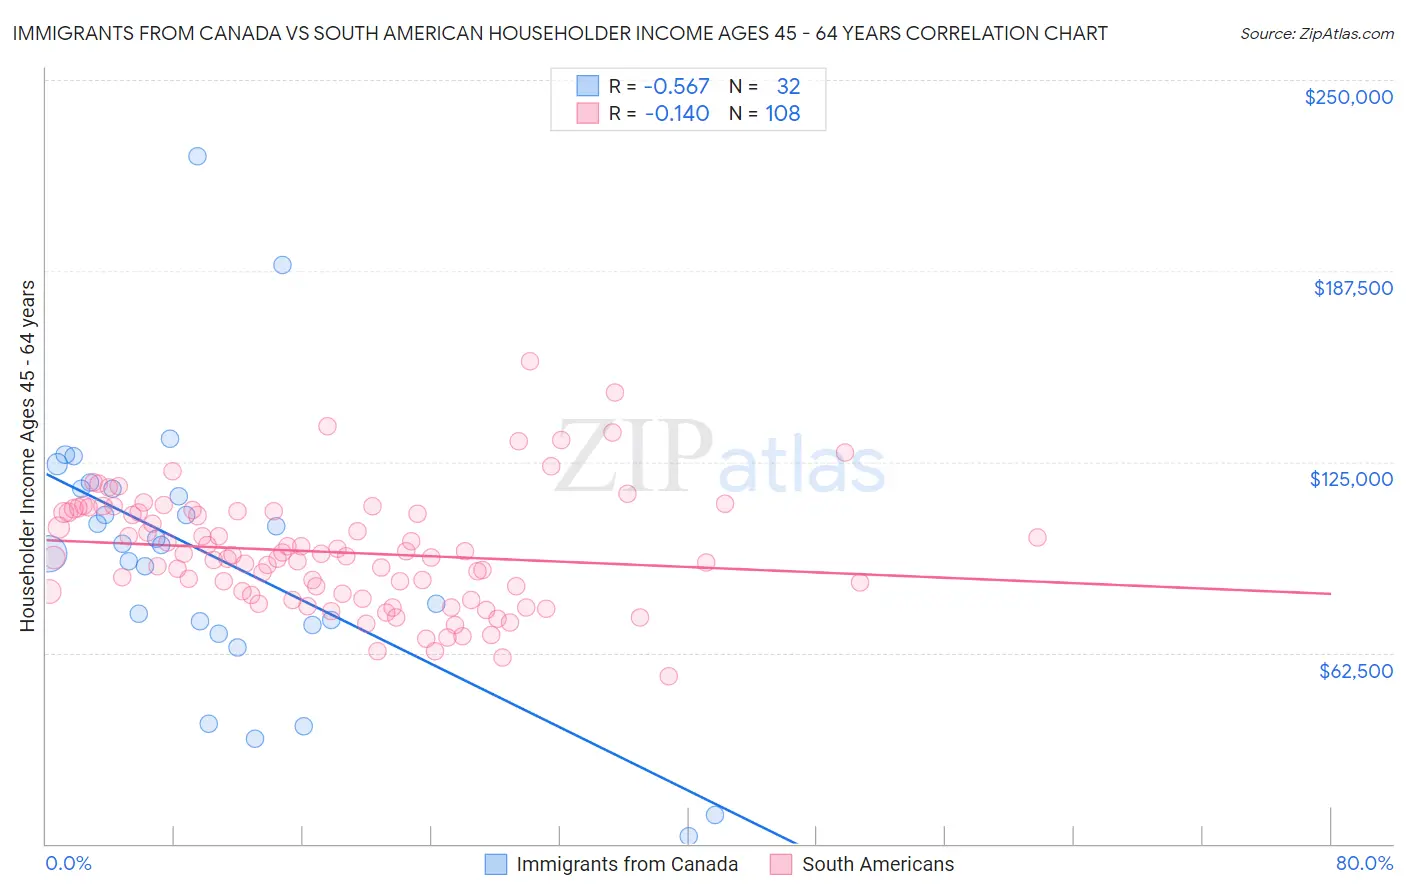 Immigrants from Canada vs South American Householder Income Ages 45 - 64 years